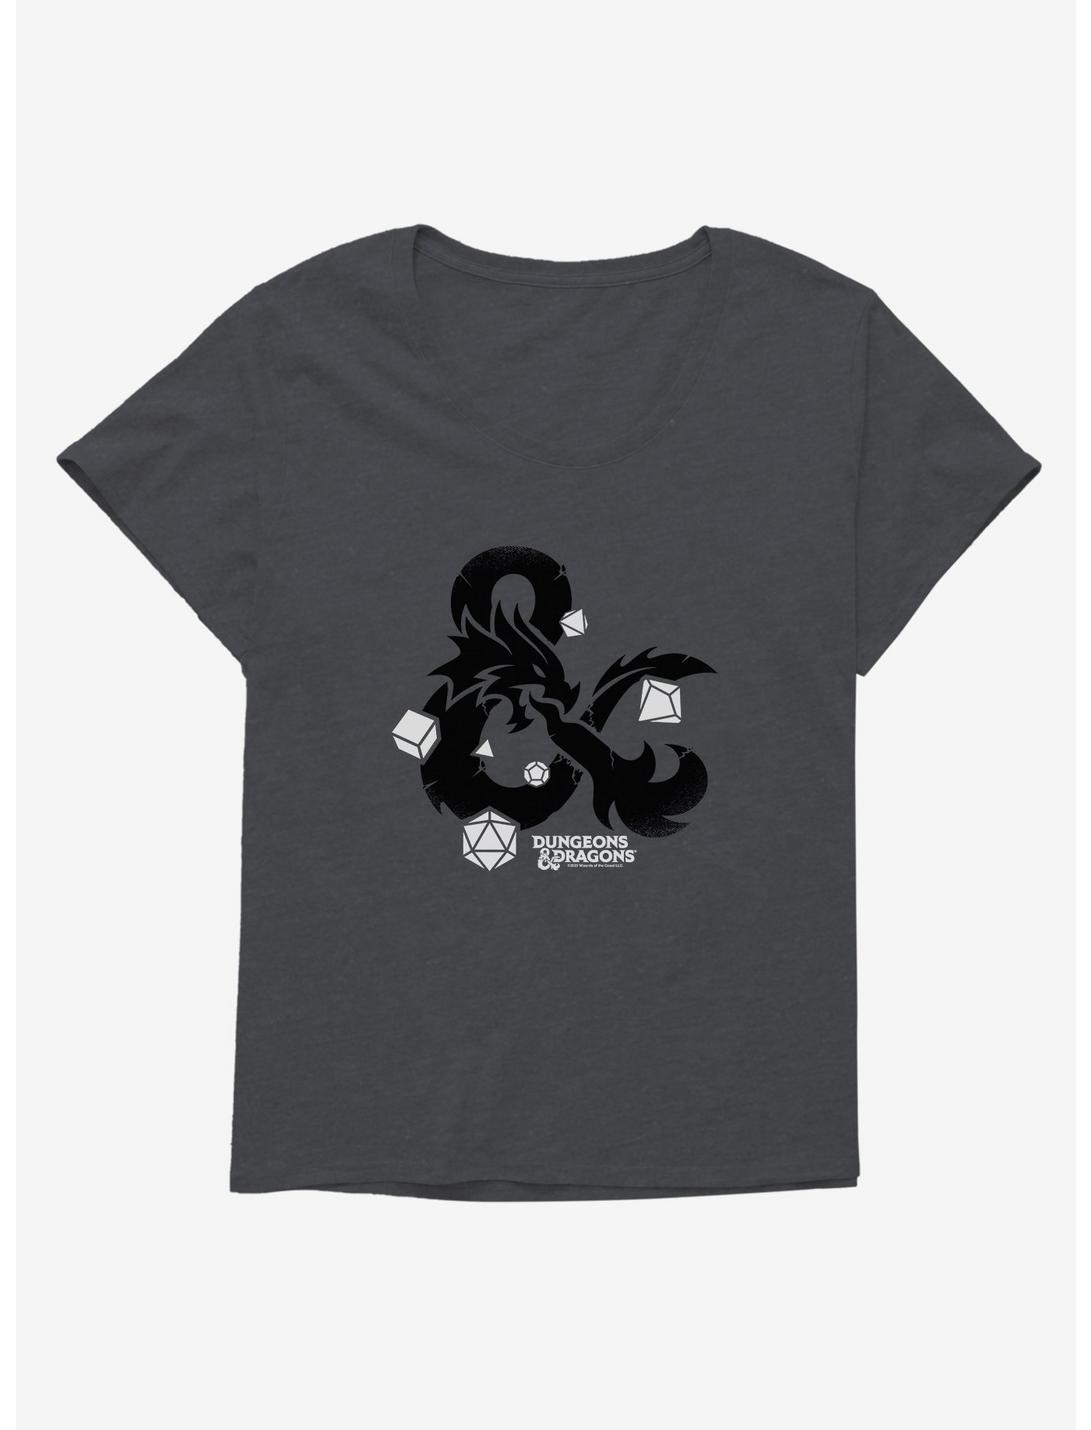 Dungeons & Dragons Dice Set Ampersand Womens T-Shirt Plus Size, CHARCOAL HEATHER, hi-res